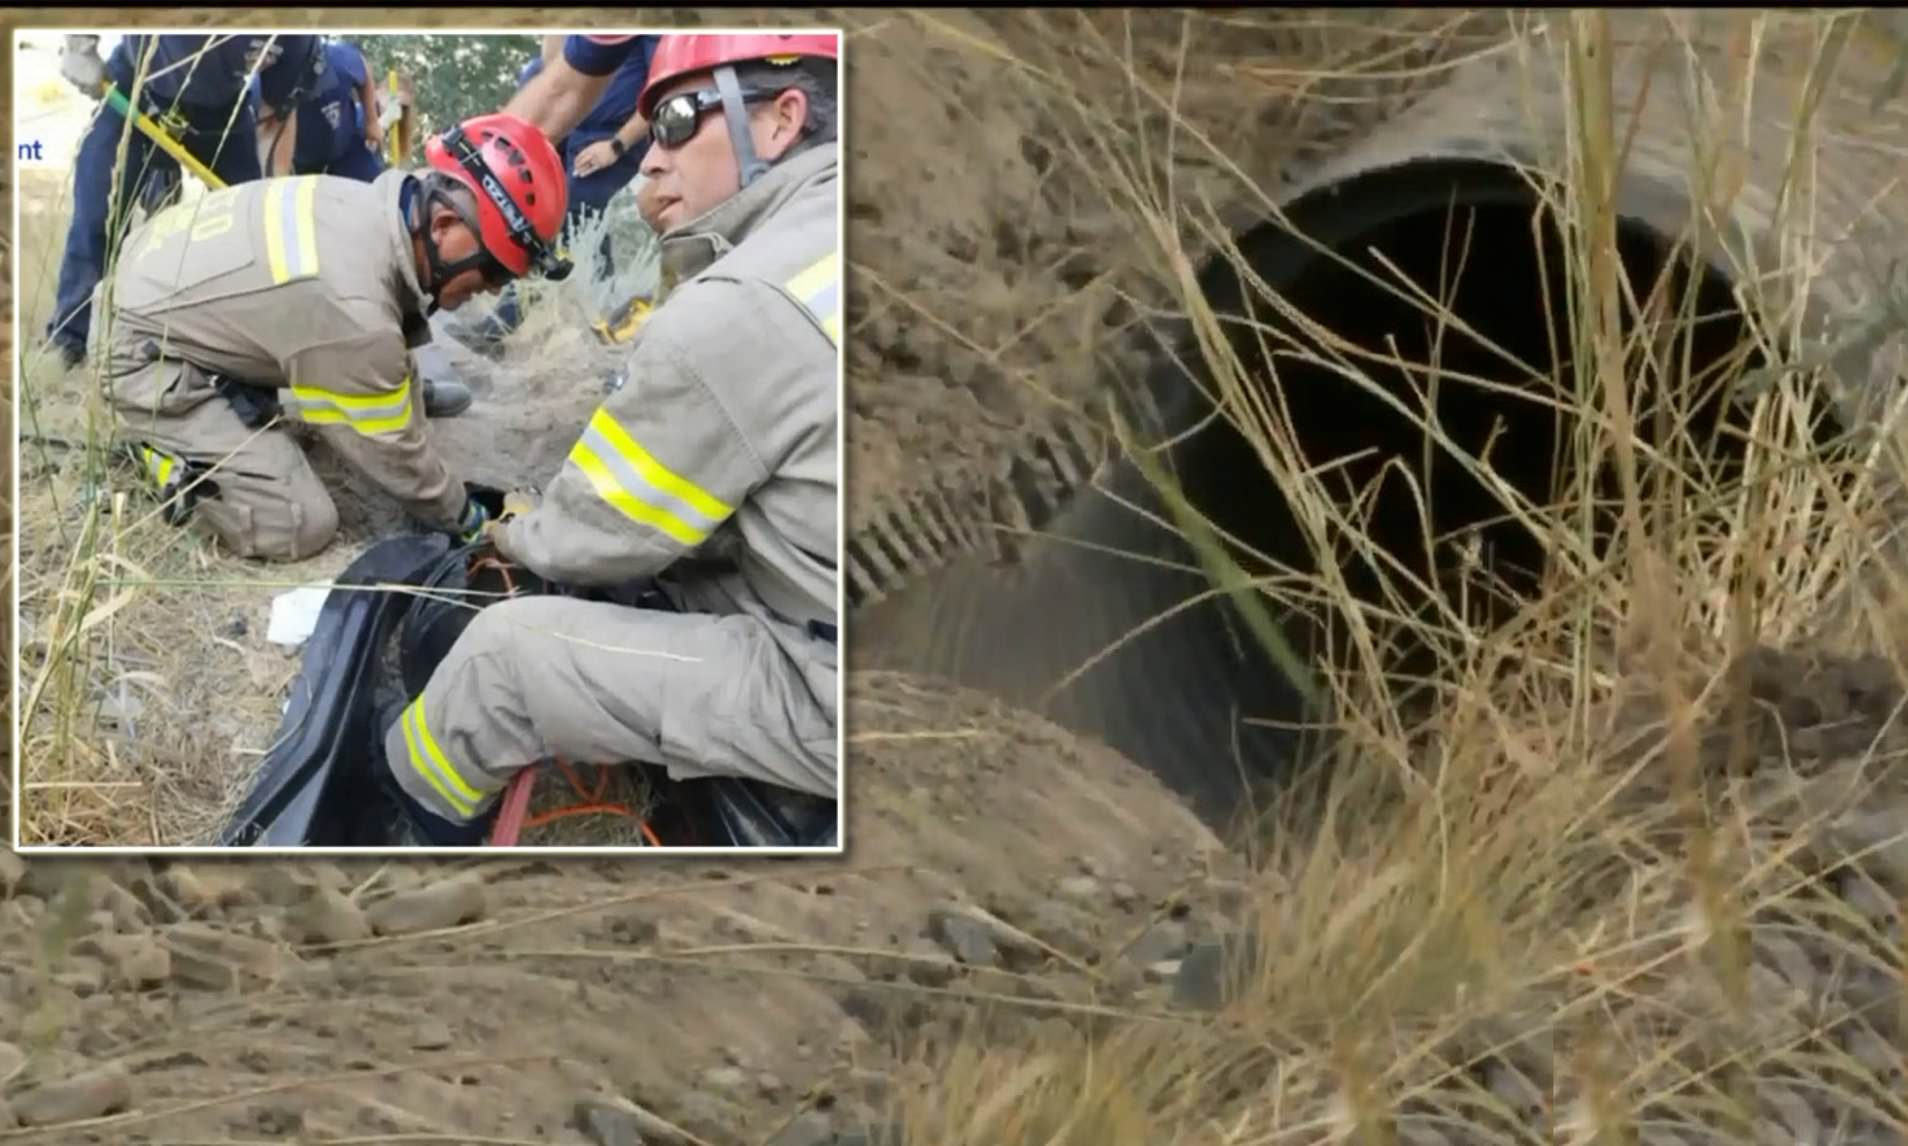 Utah Native Stuck in Pipe for Hours Before Being Rescued